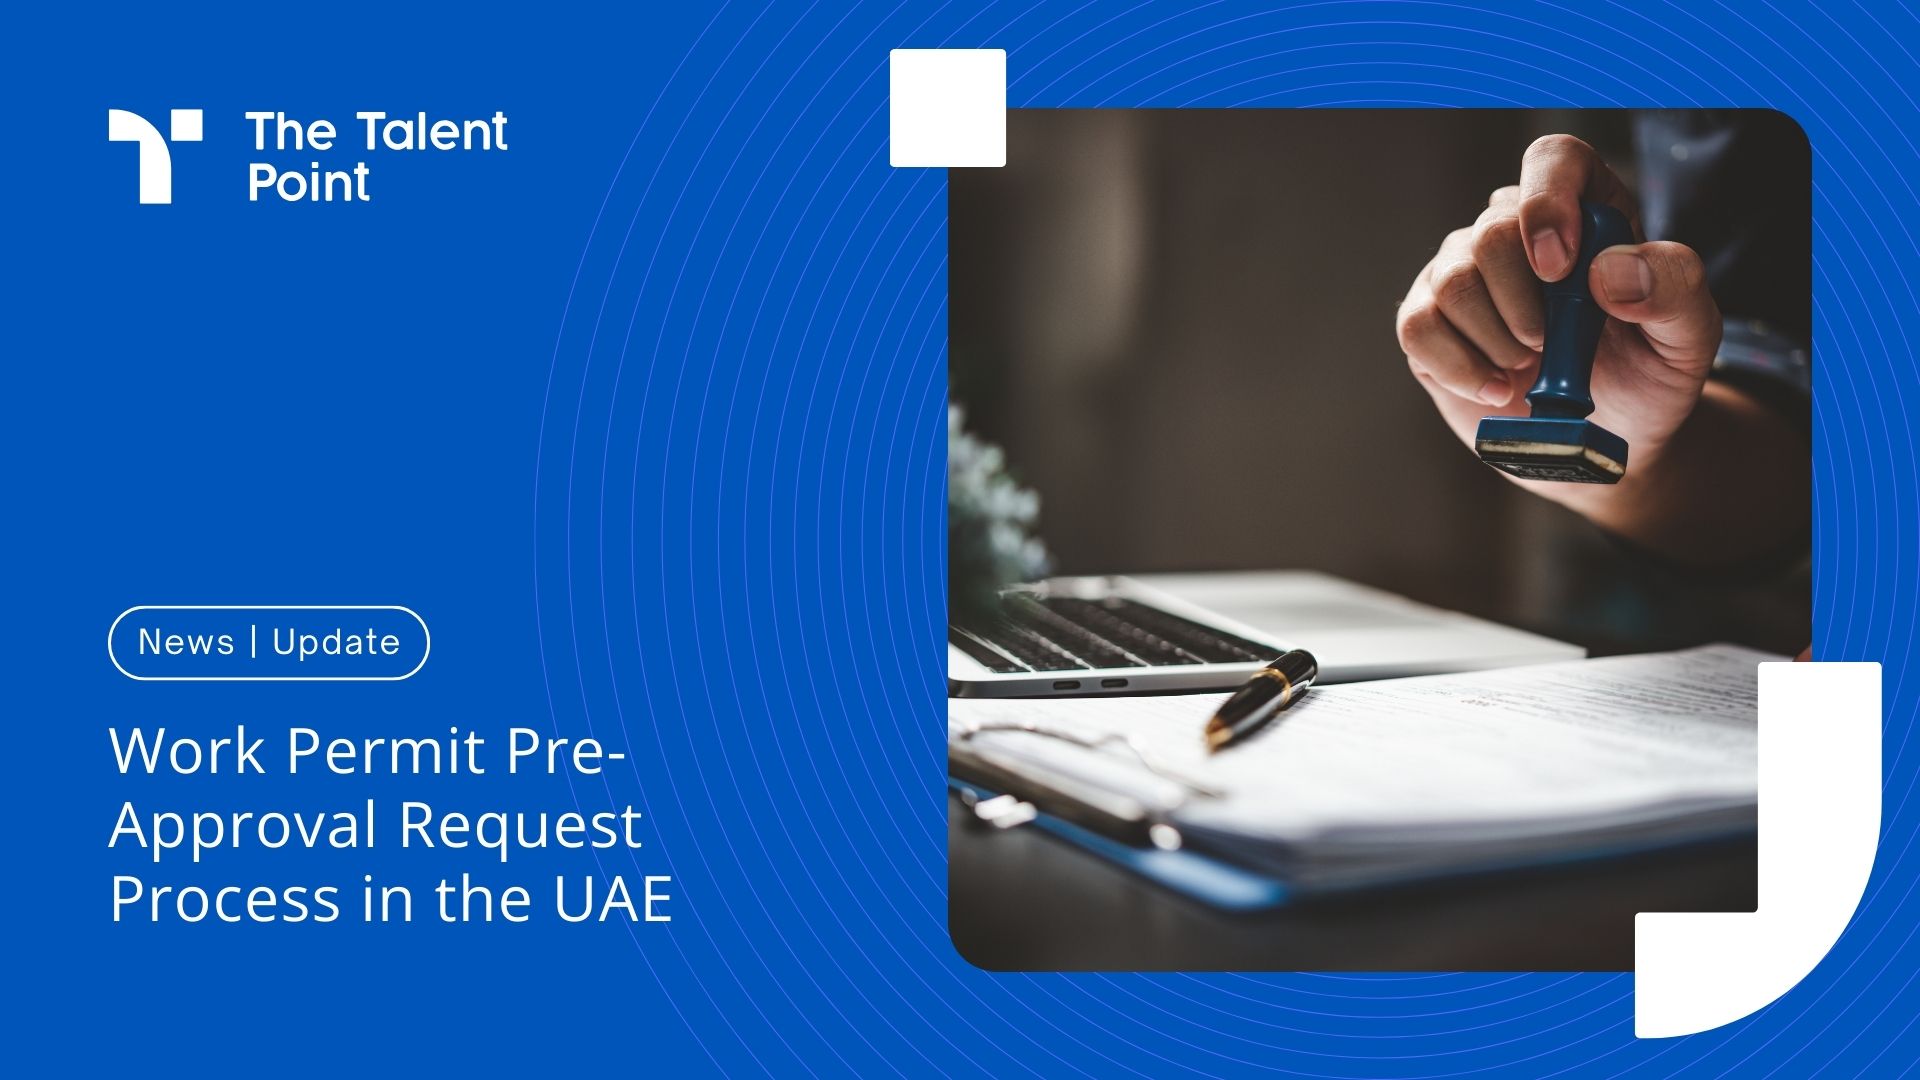 Work Permit Pre-Approval Request Process in the UAE